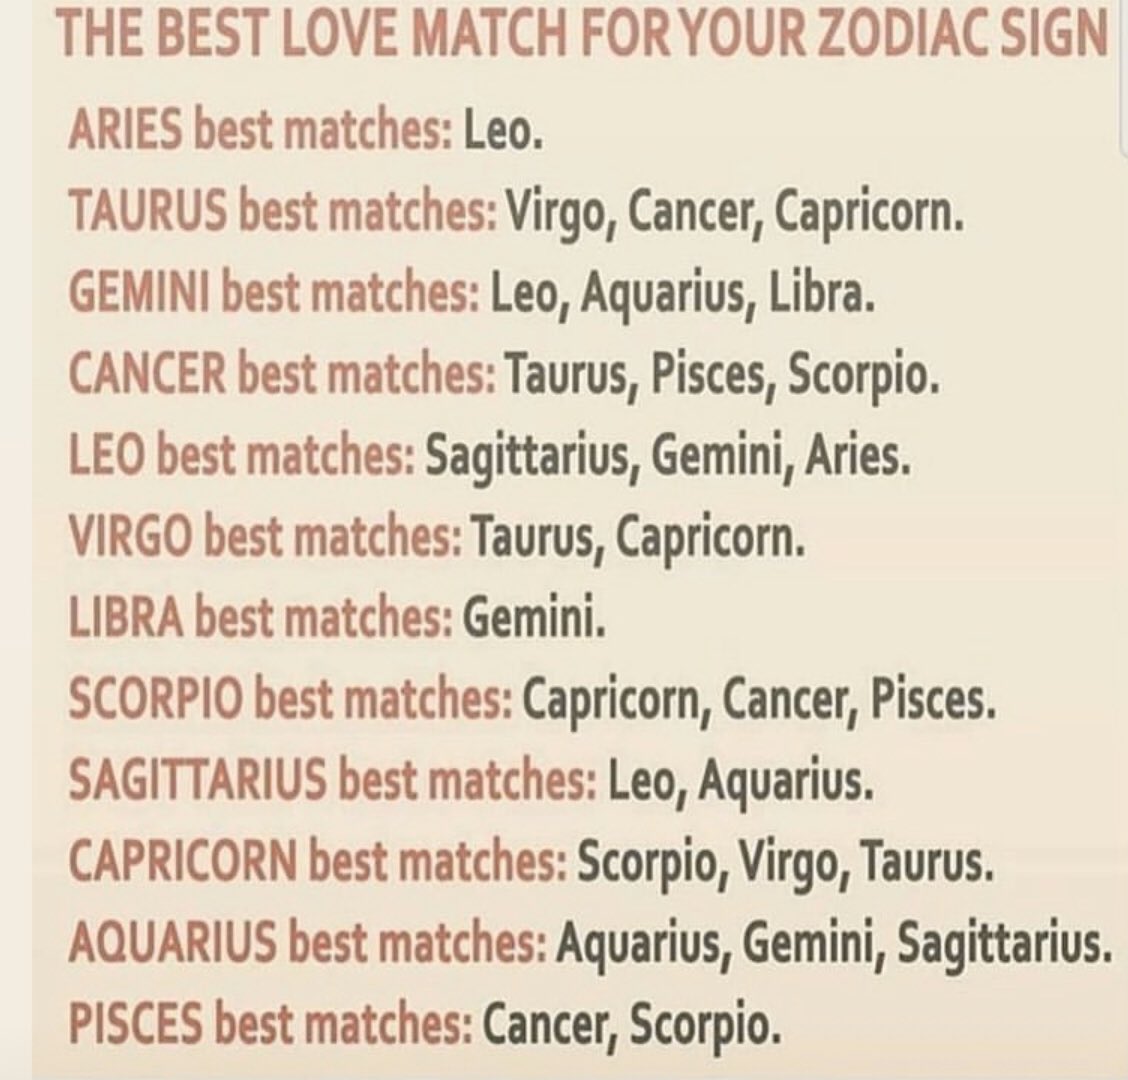 What is the best match for Capricorn? 